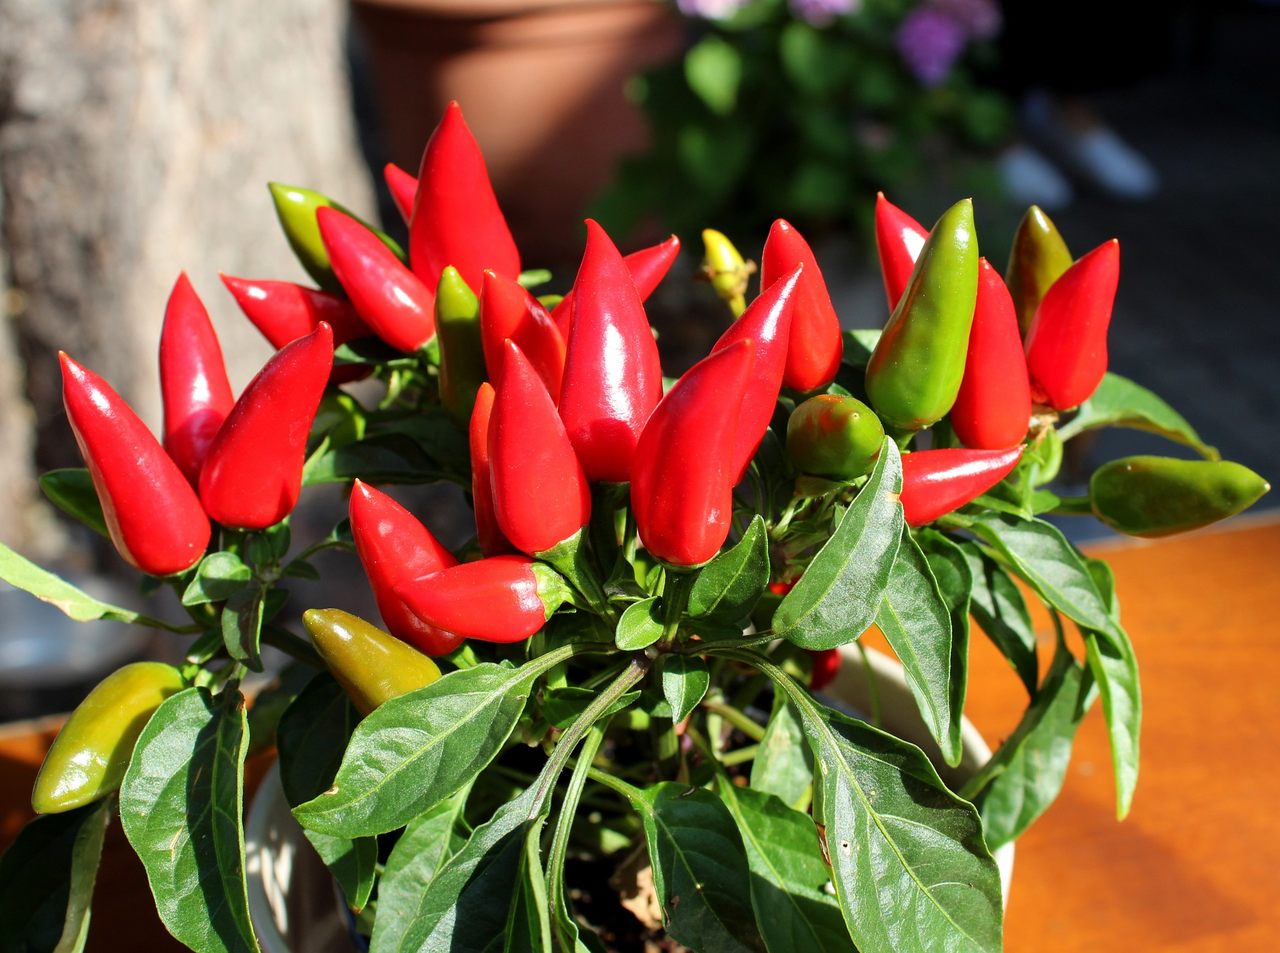 Pepper plants made for a hotter holiday.